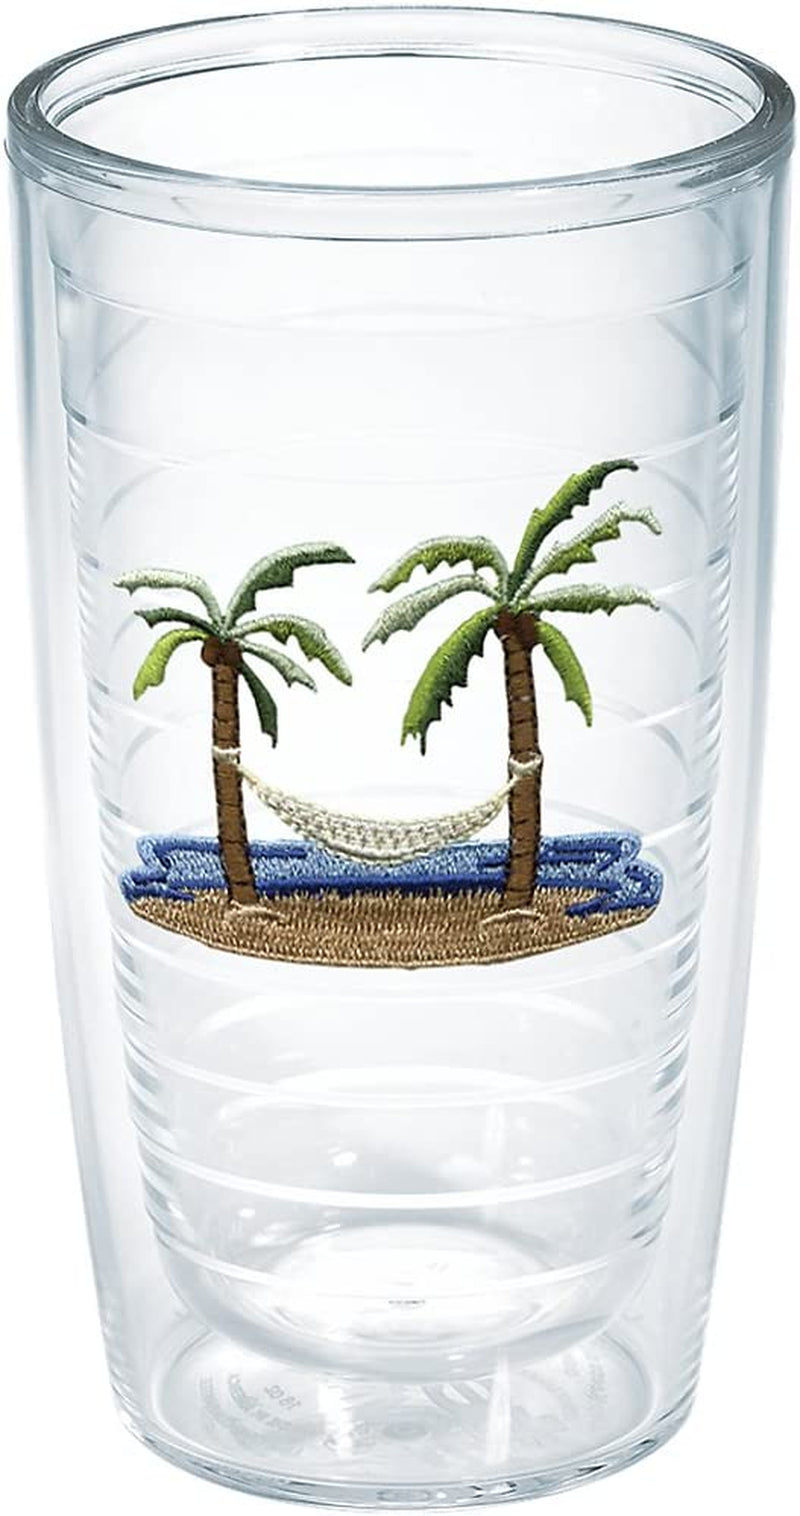 TERVIS Tumbler, 16-Ounce, "Palm Trees and Hammock", 2-Pack , Clear - 1035967 Home & Garden > Kitchen & Dining > Tableware > Drinkware Tervis Unlidded 16oz 